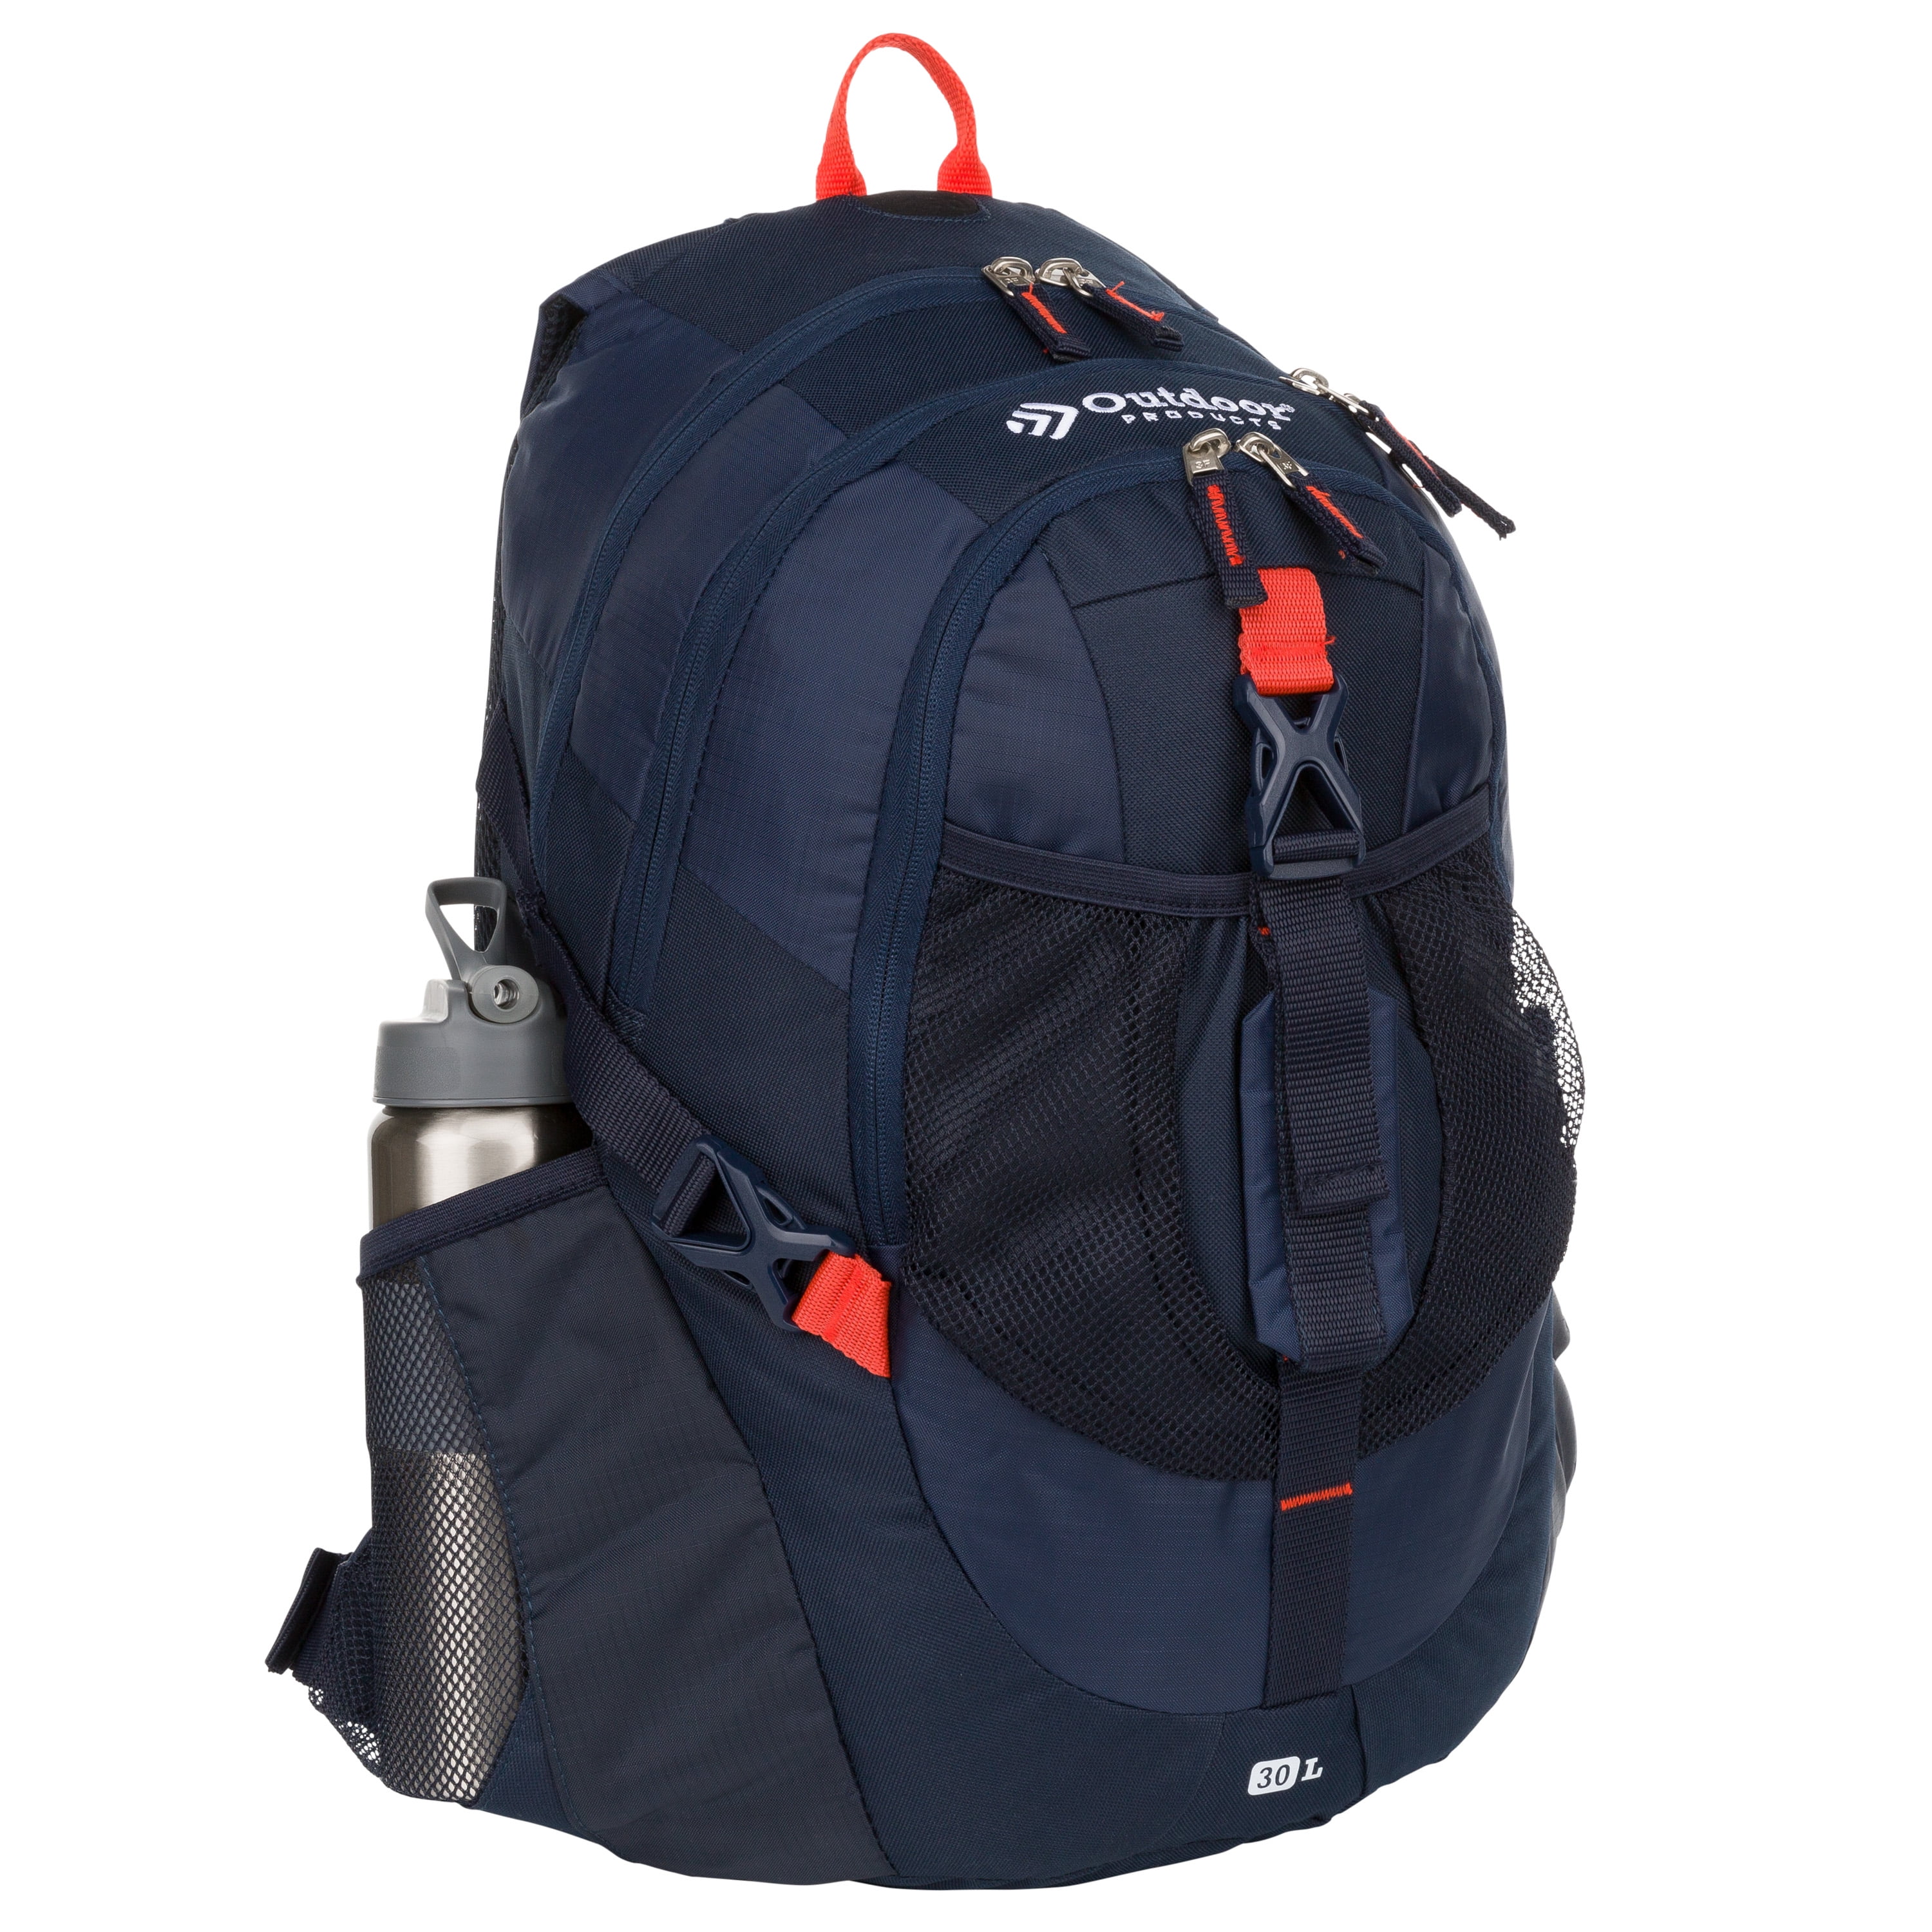 Outdoor Products Vortex 30 Ltr Backpack with Bottle, Blue, Unisex